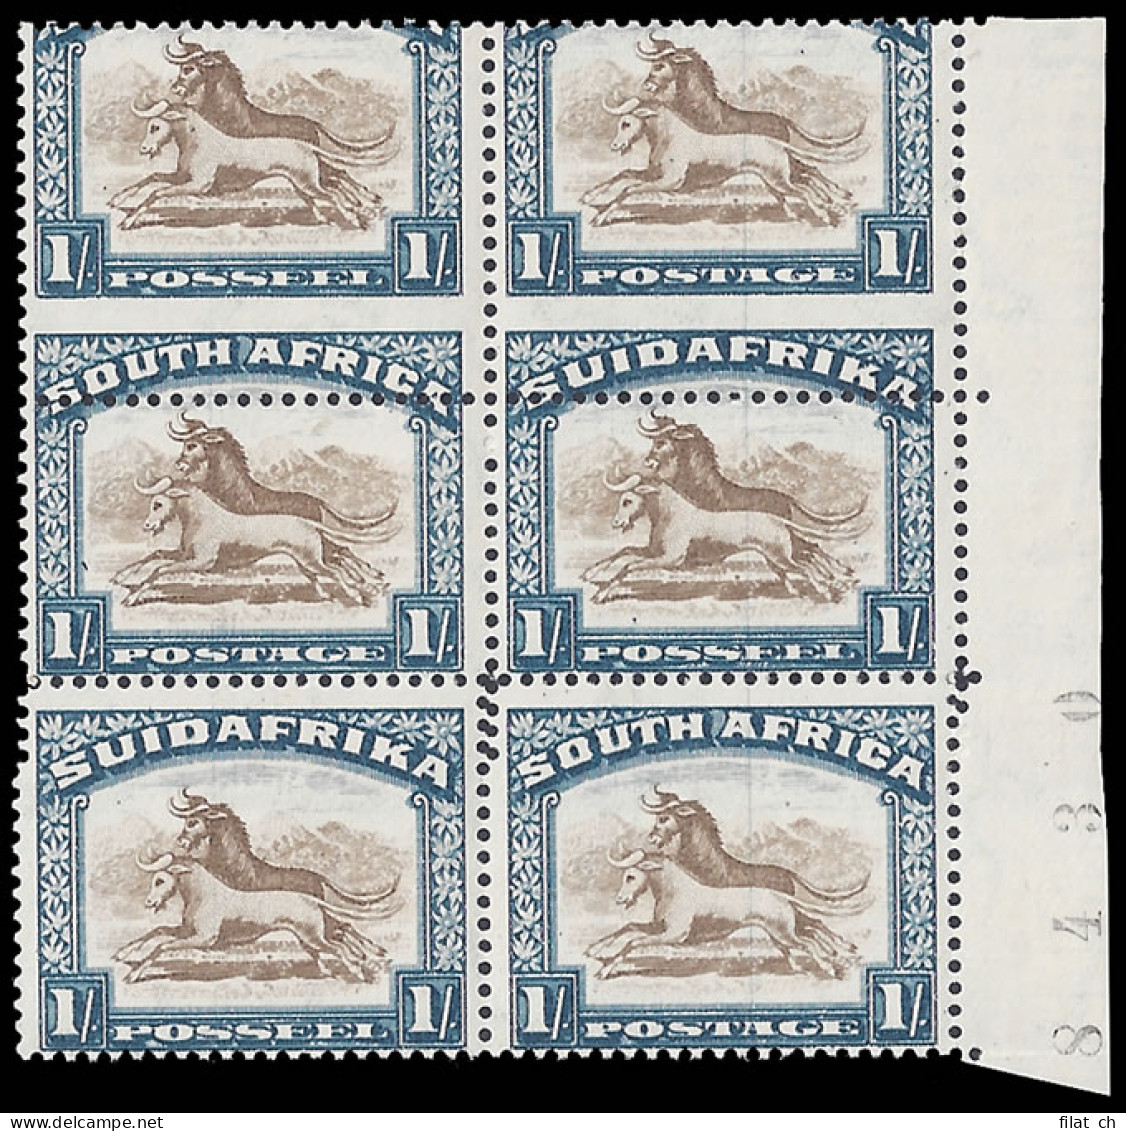 South Africa 1930 1/- Dramatic Misperforation Block - Sin Clasificación